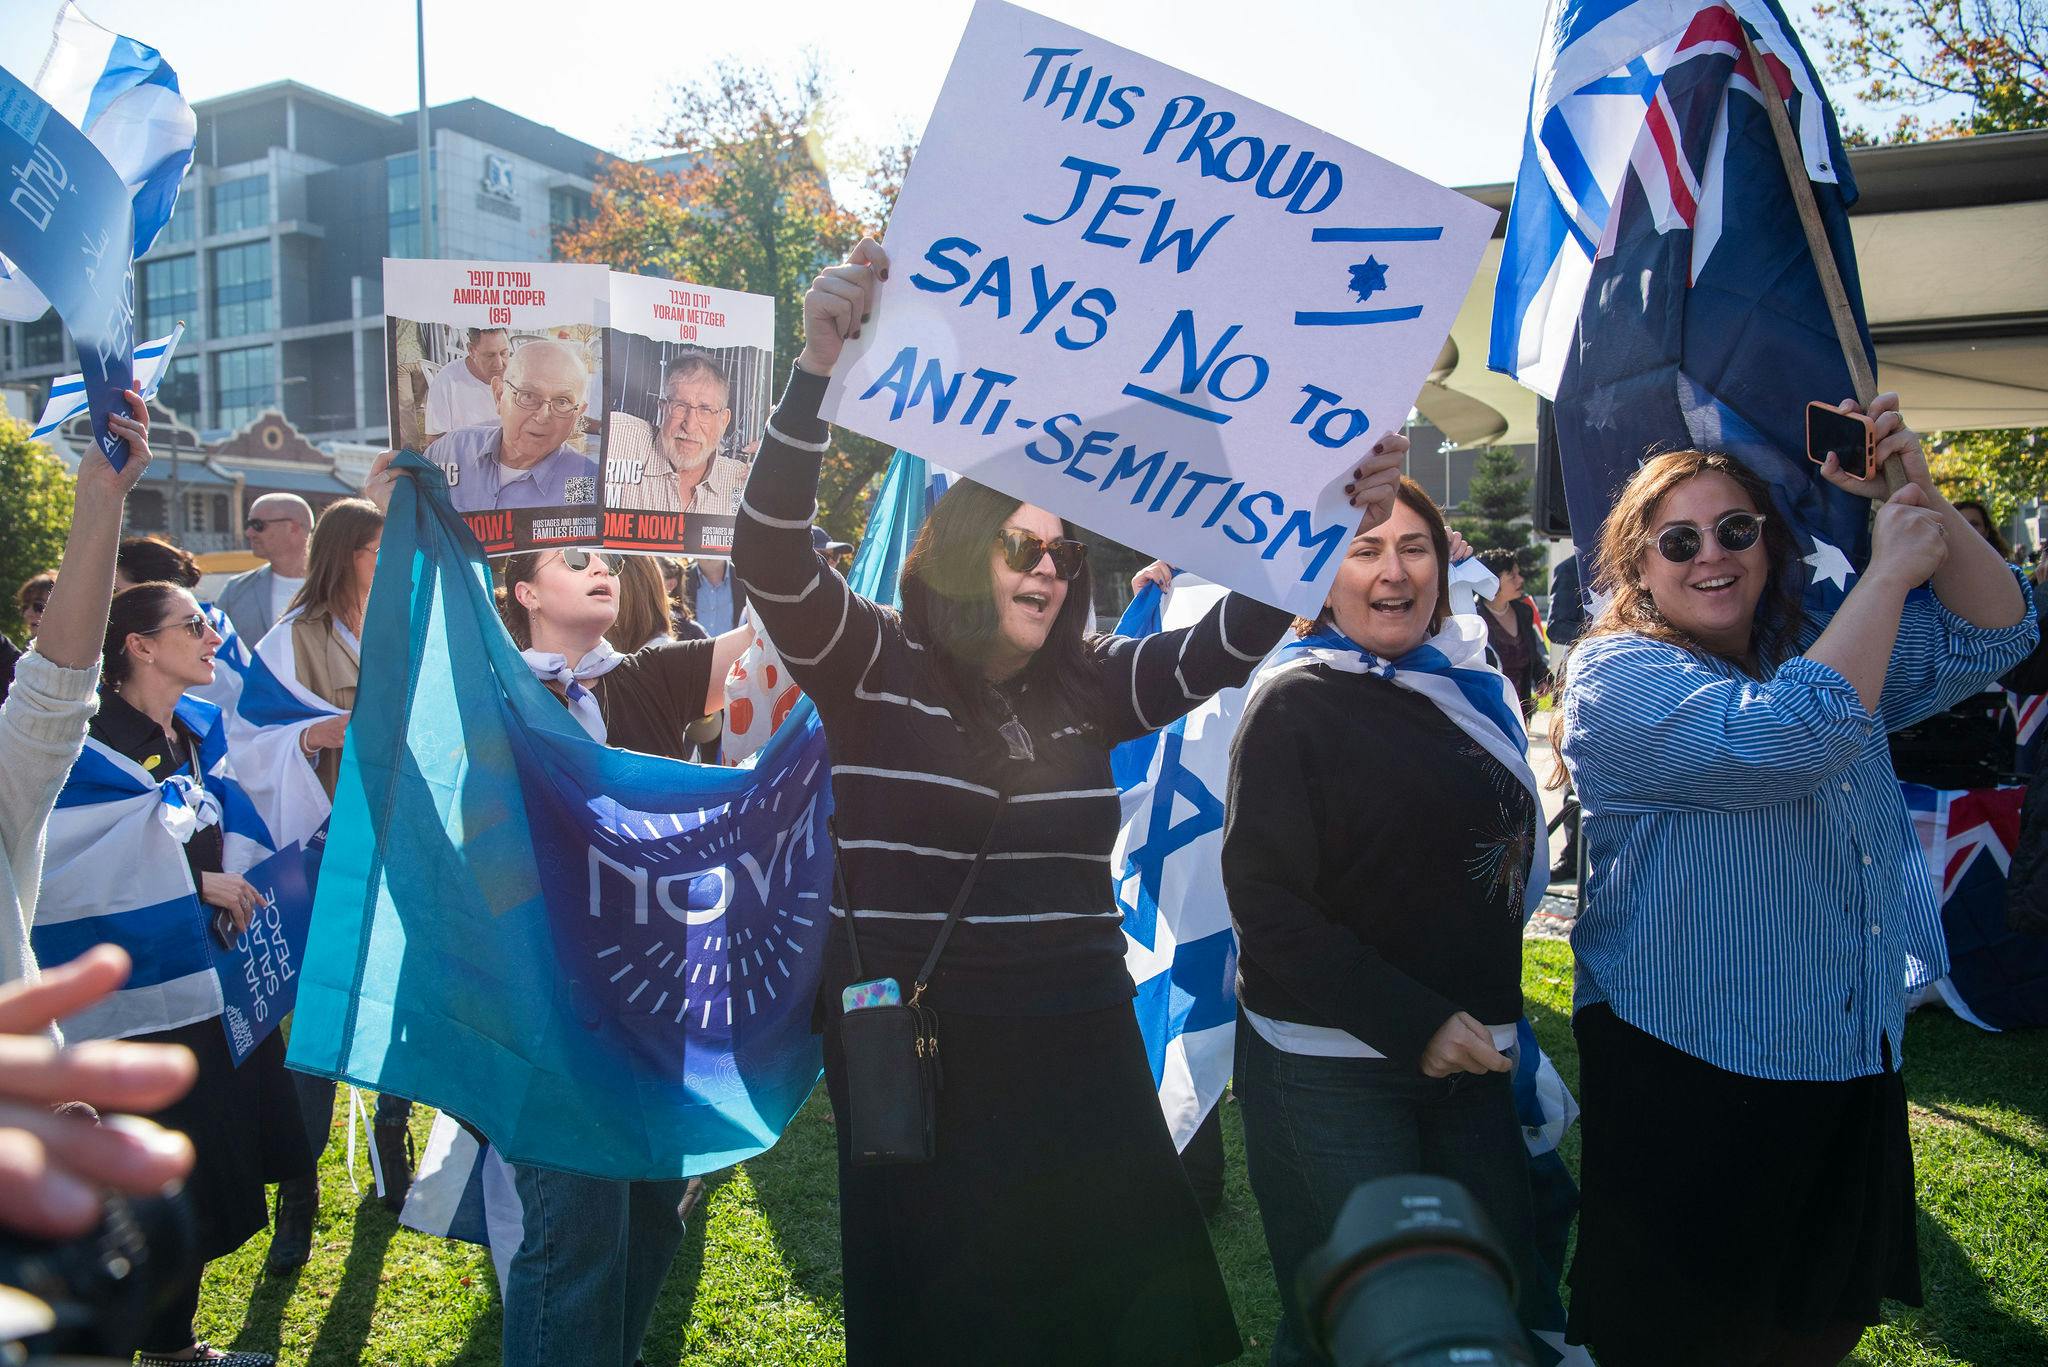 Pro-Israel protesters hold sign reading 'This proud Jew says no to antisemitism'